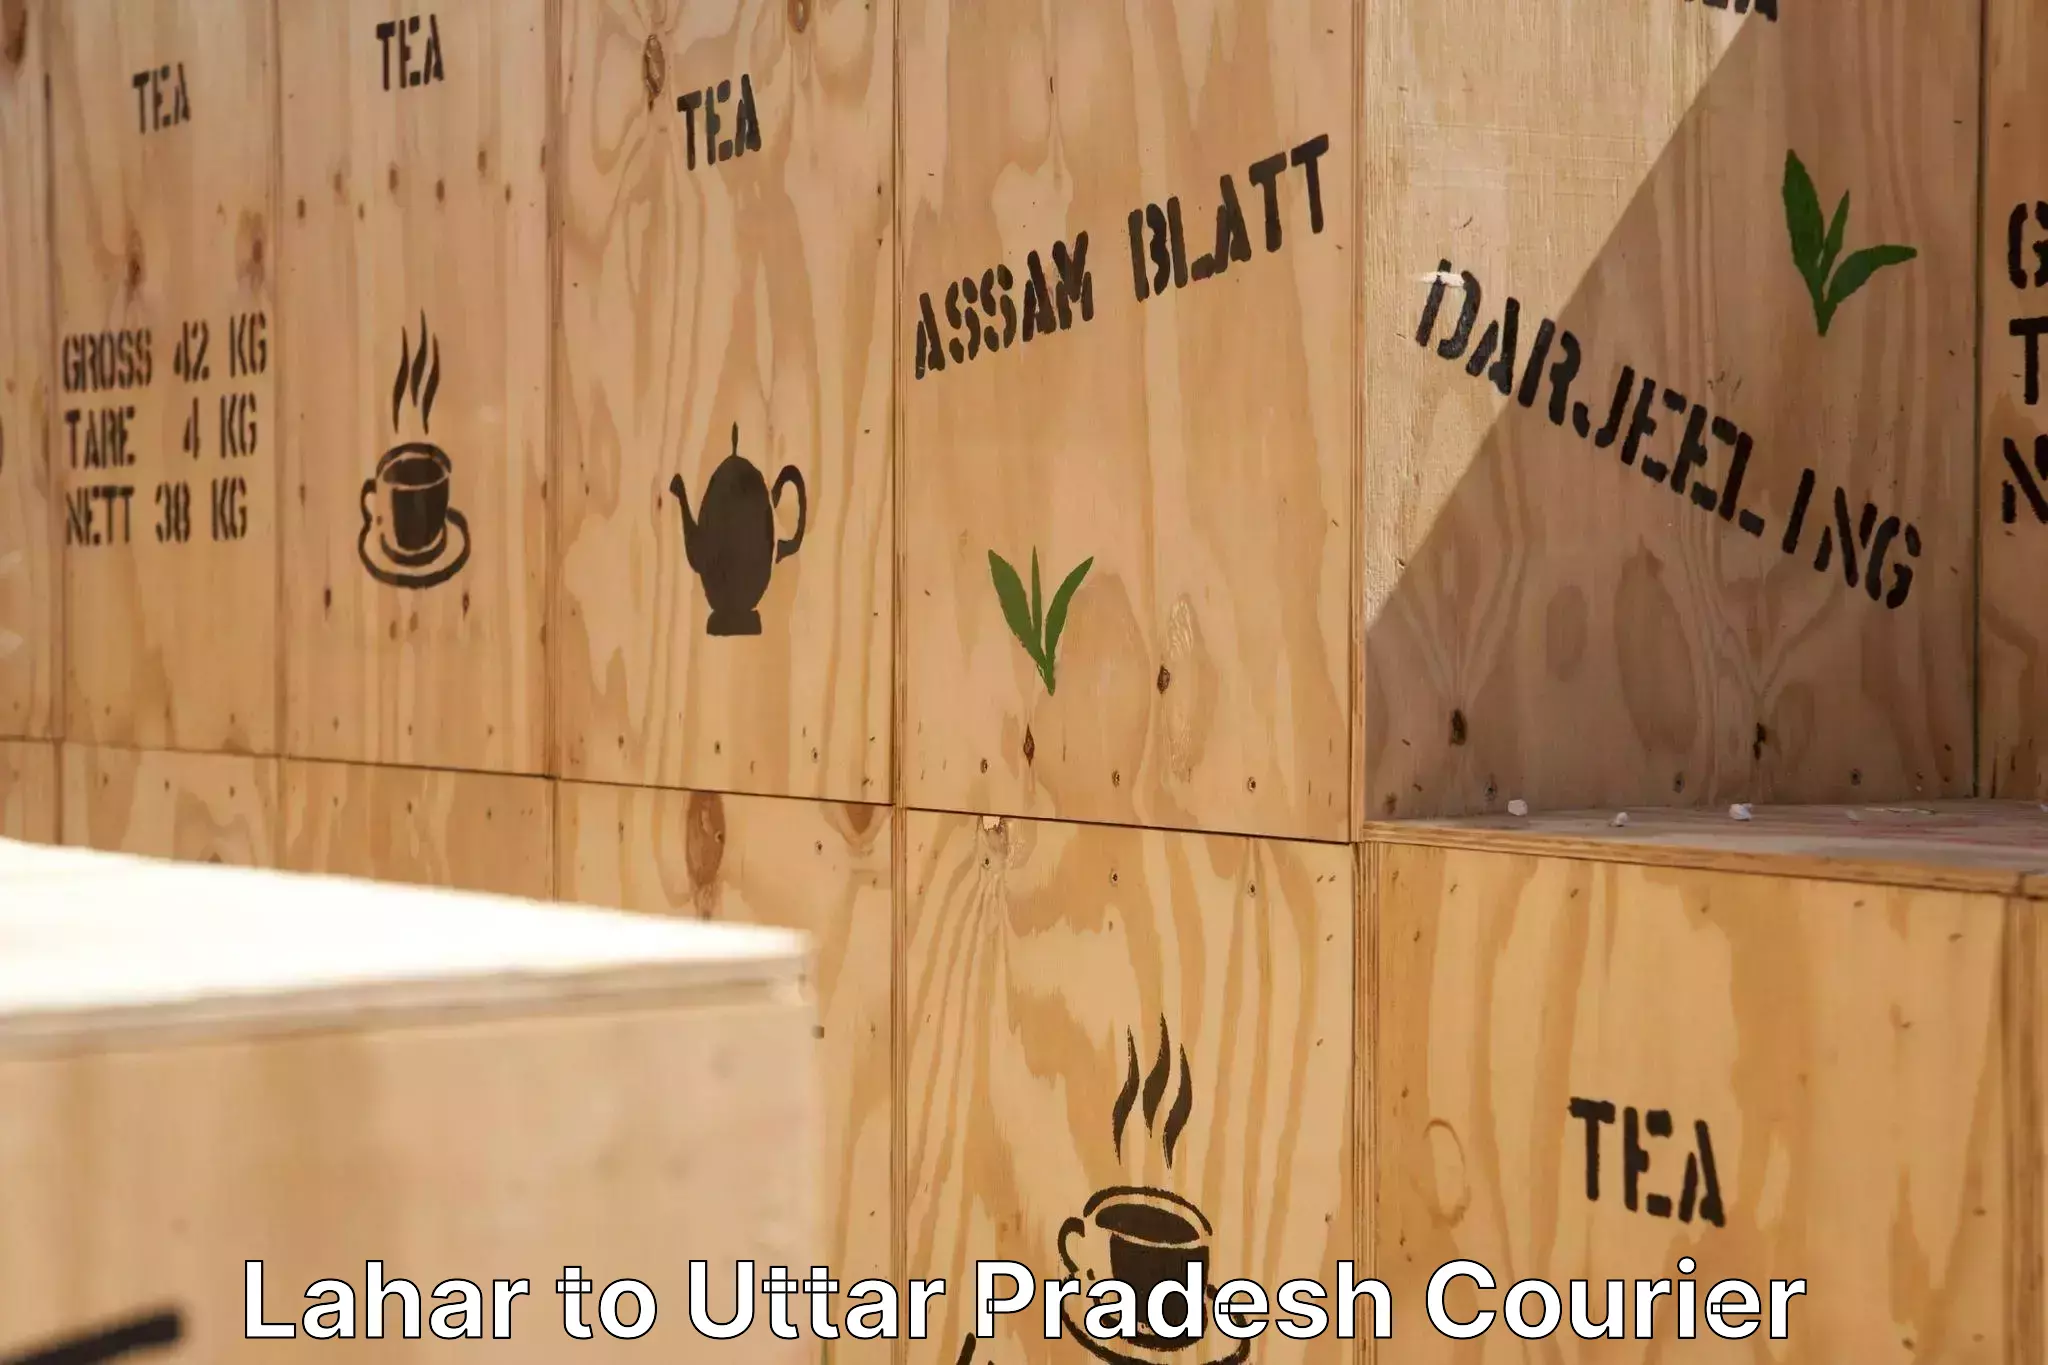 Personalized furniture moving Lahar to Noida